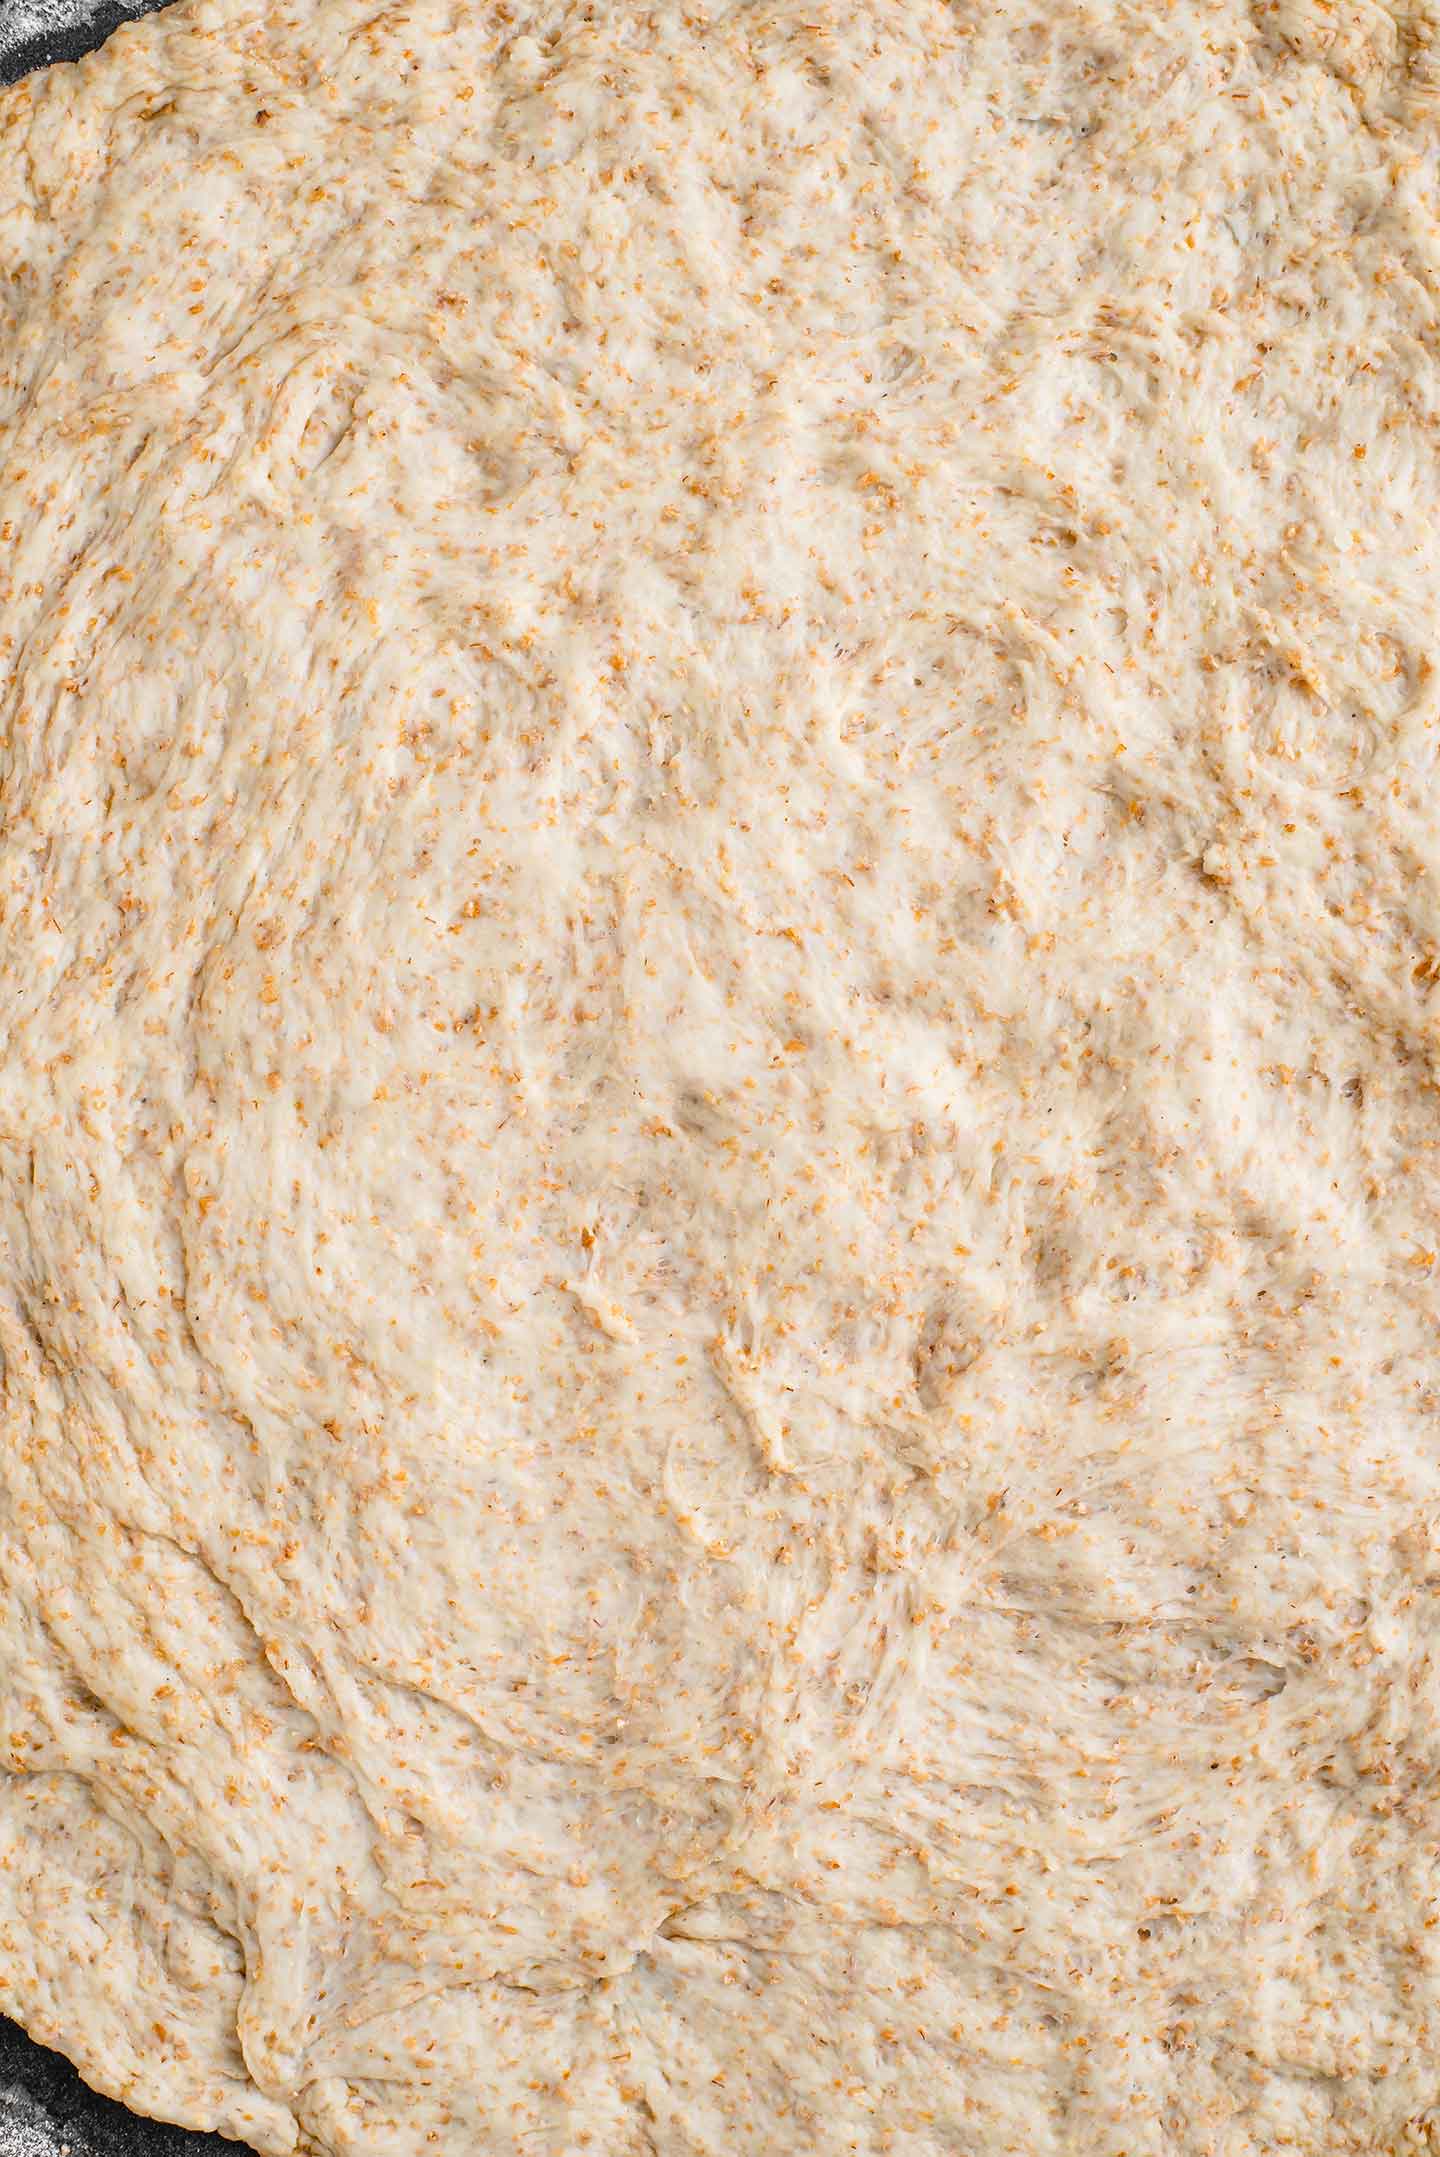 Top down view of pizza dough stretched to fill a pizza pan.